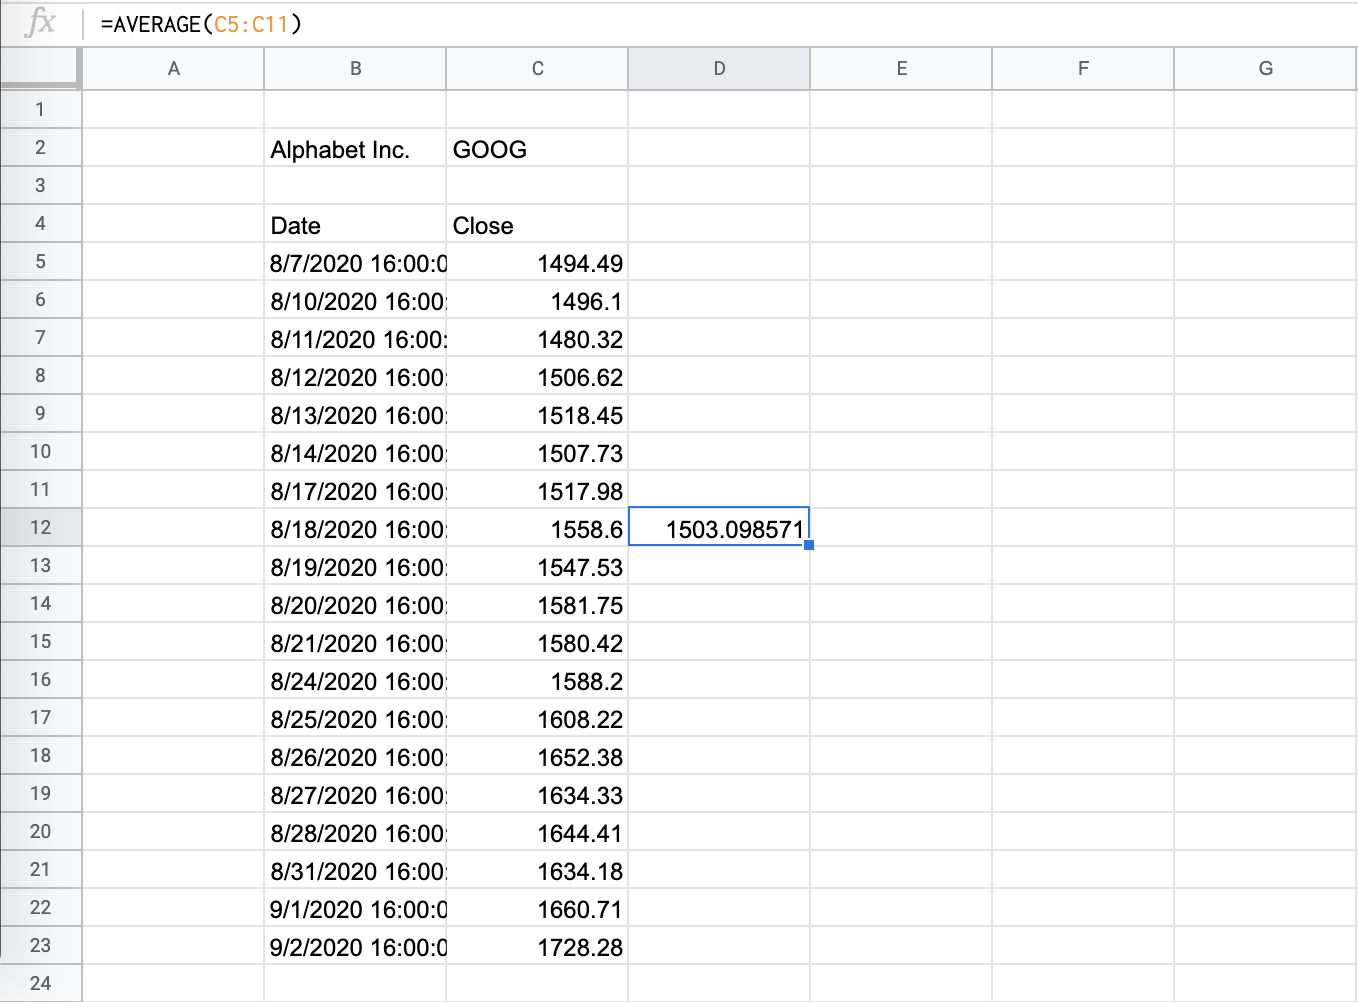 How to Calculate the Simple Moving Average in Google Sheets